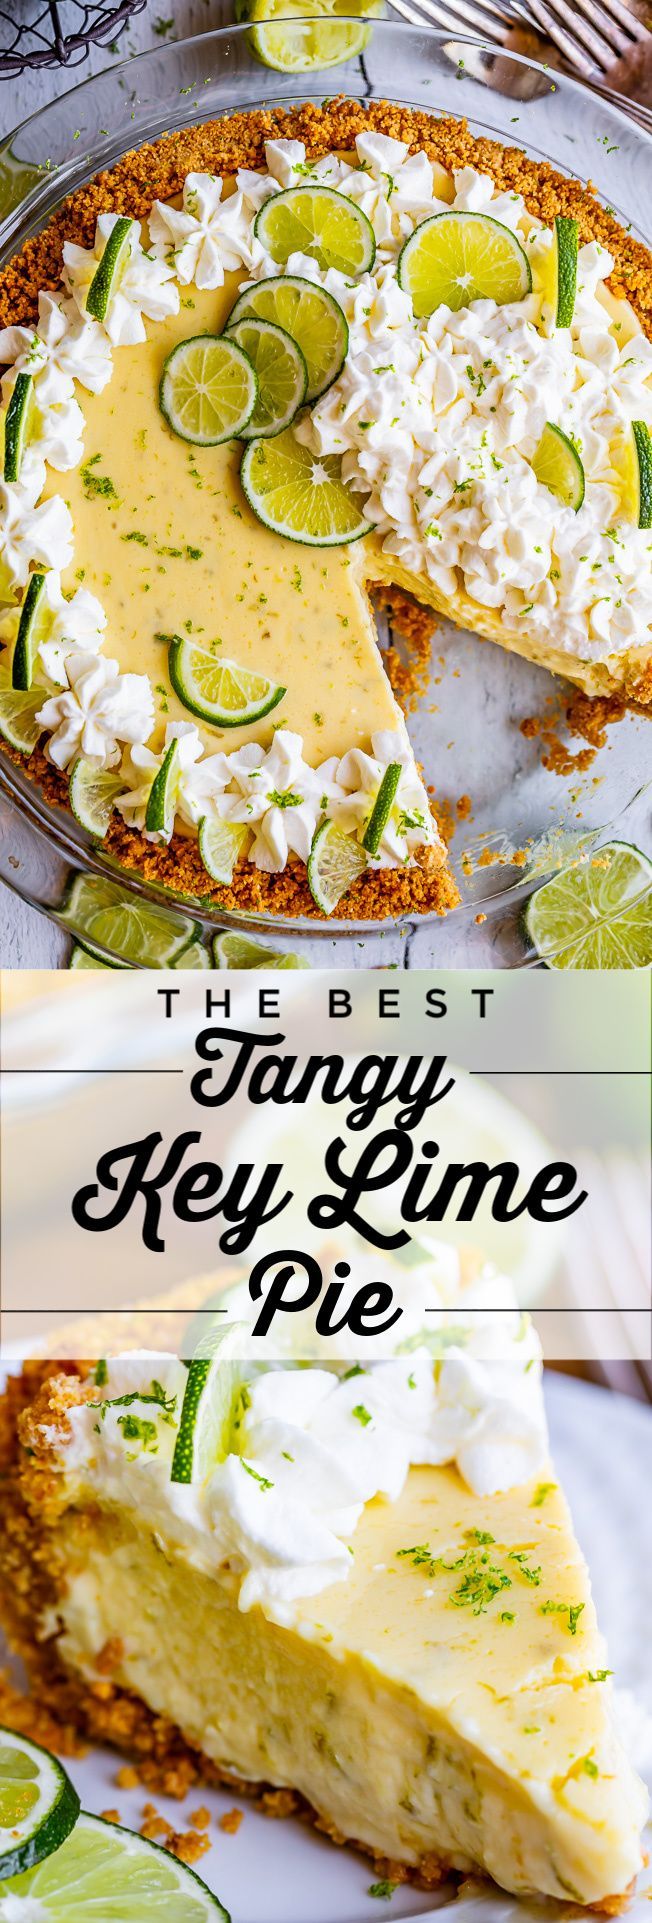 The Best Zesty Key Lime Pie Recipe from The Food Charlatan -   18 desserts Summer lime pie ideas